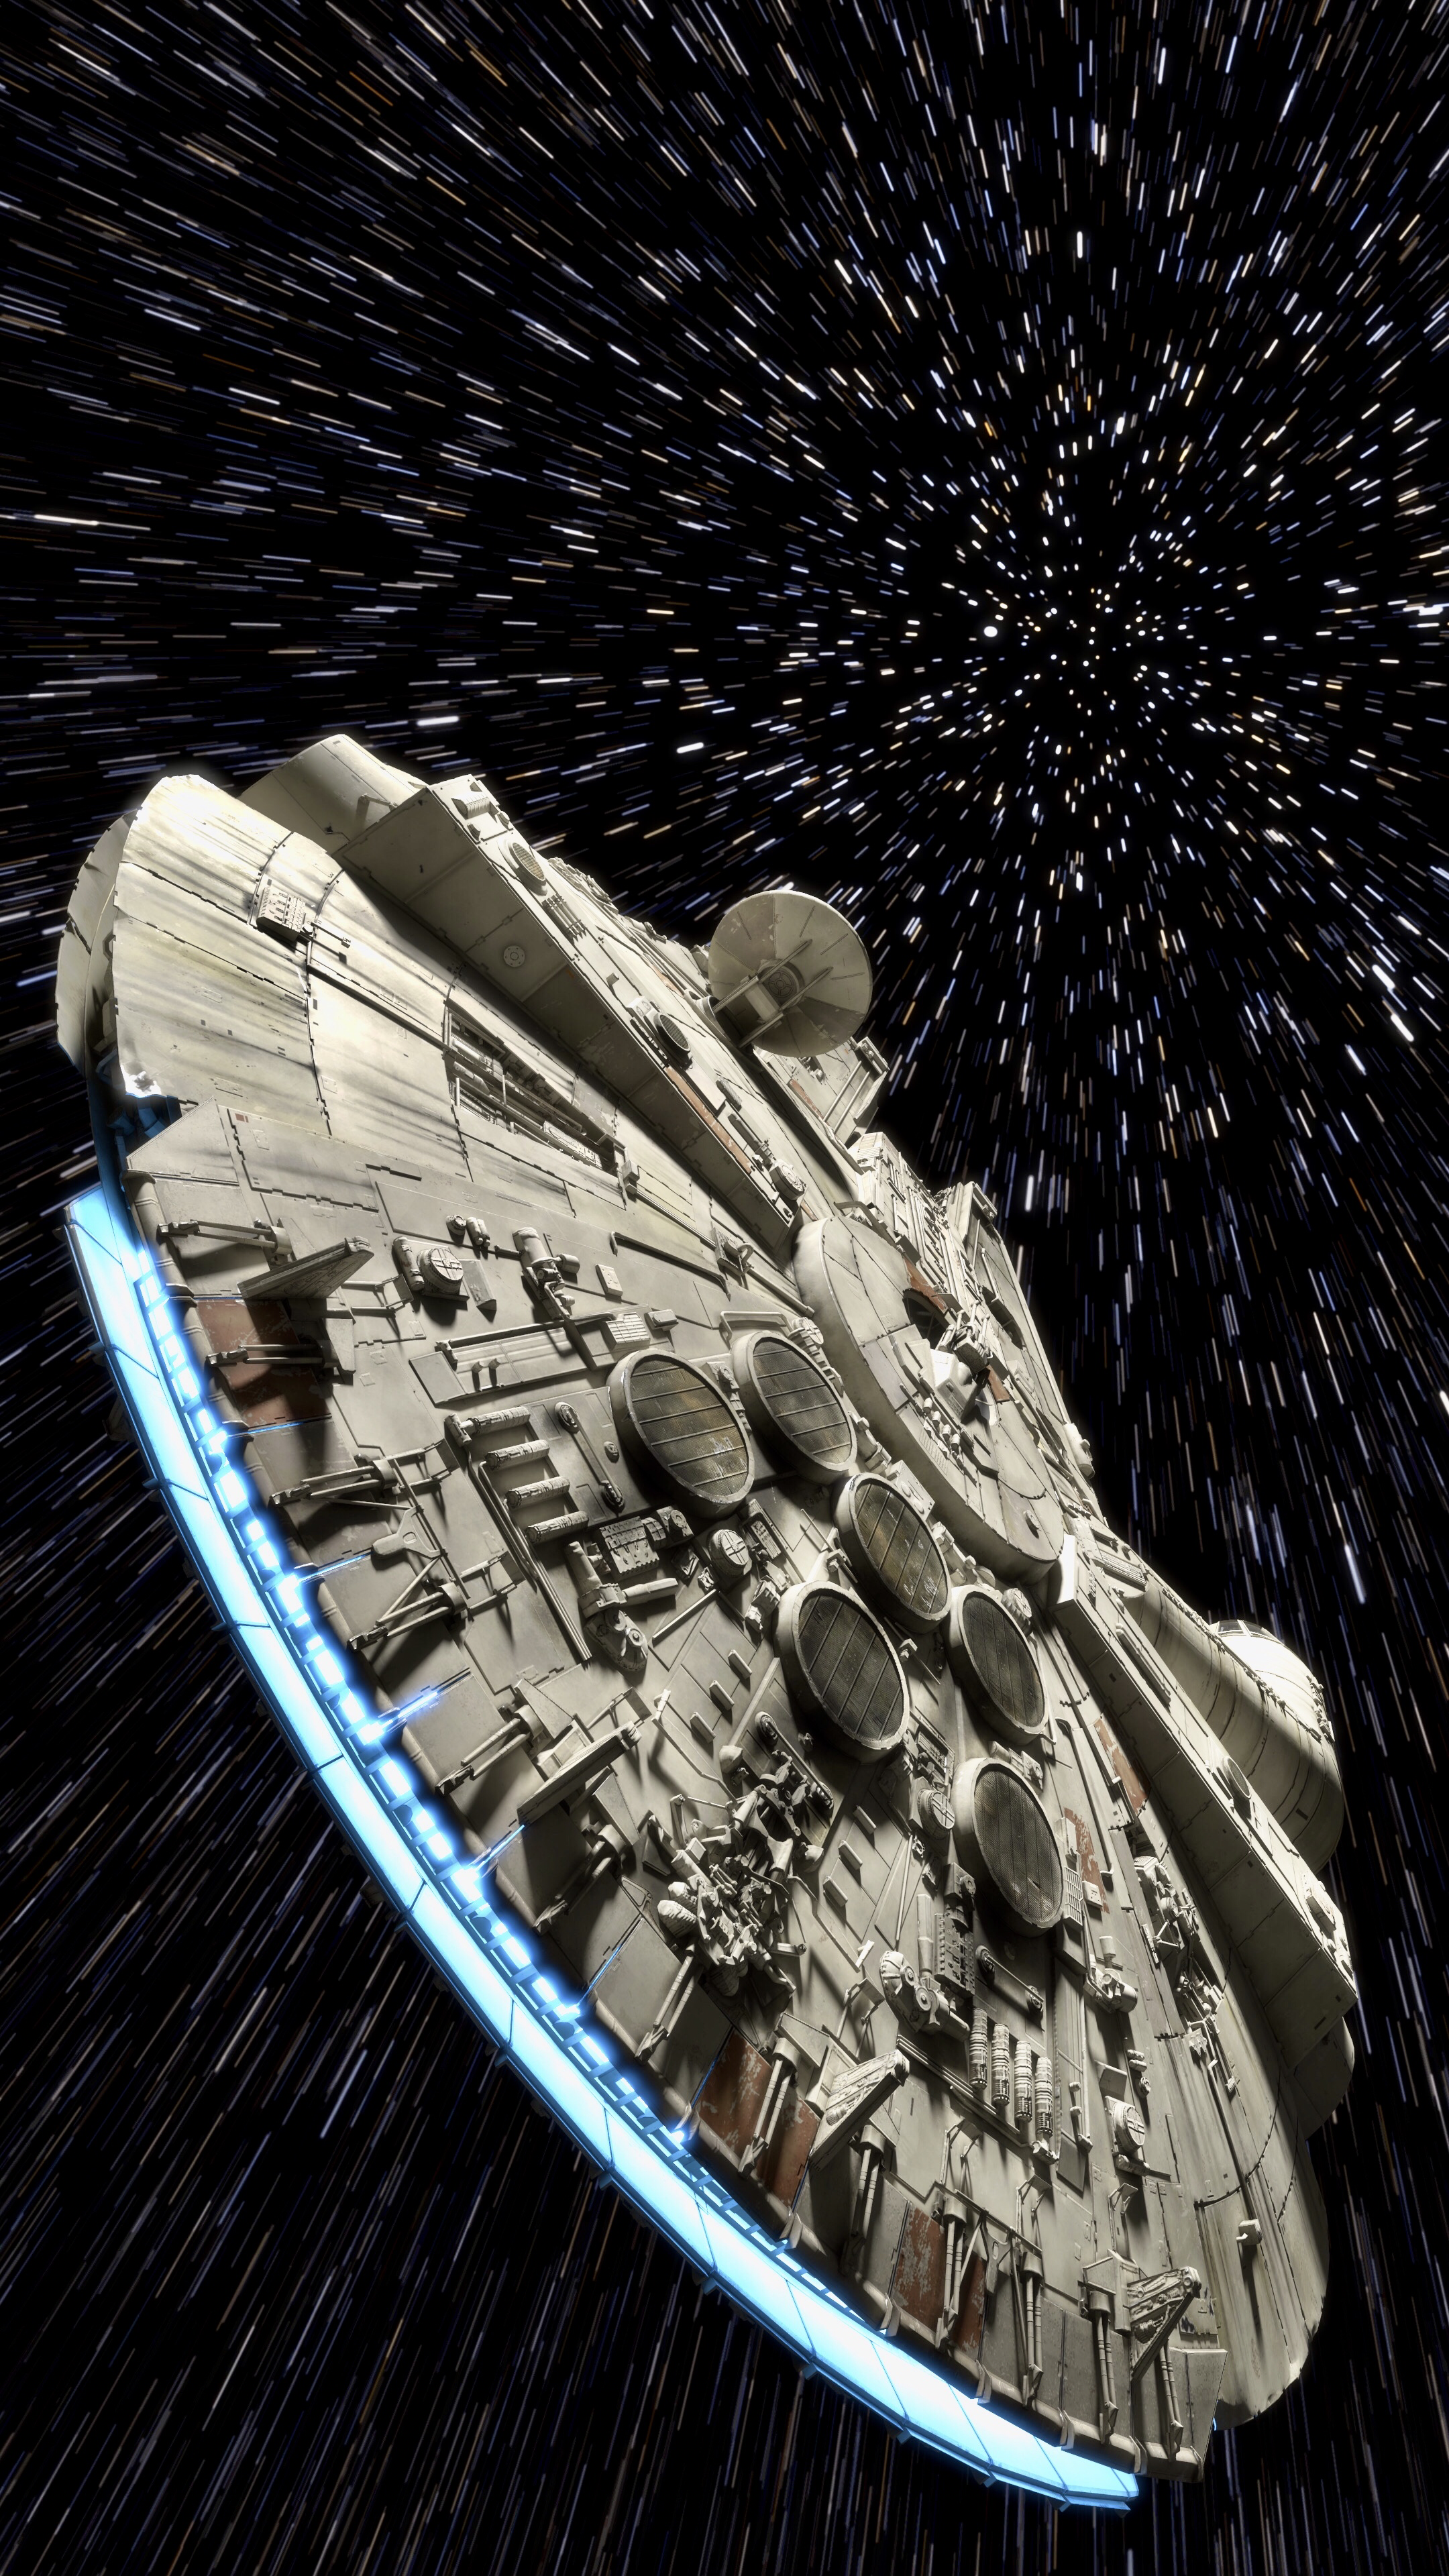 Millennium Falcon 4K Mobile Wallpaper. Not mine but thought you